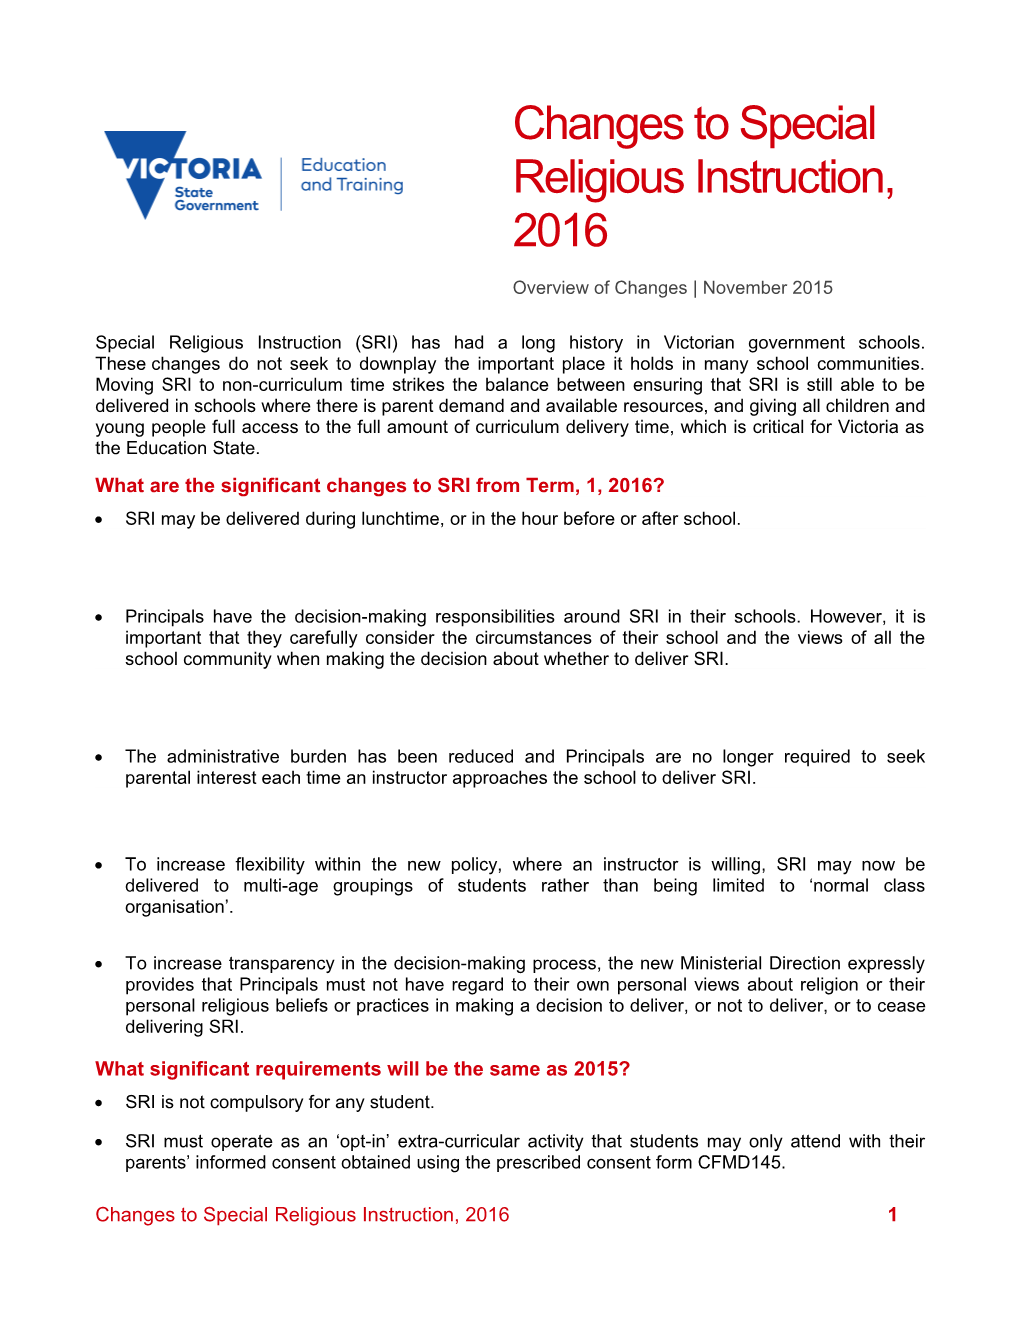 Changes to SRI, Term 1, 2016 (1 Pager) - FINAL